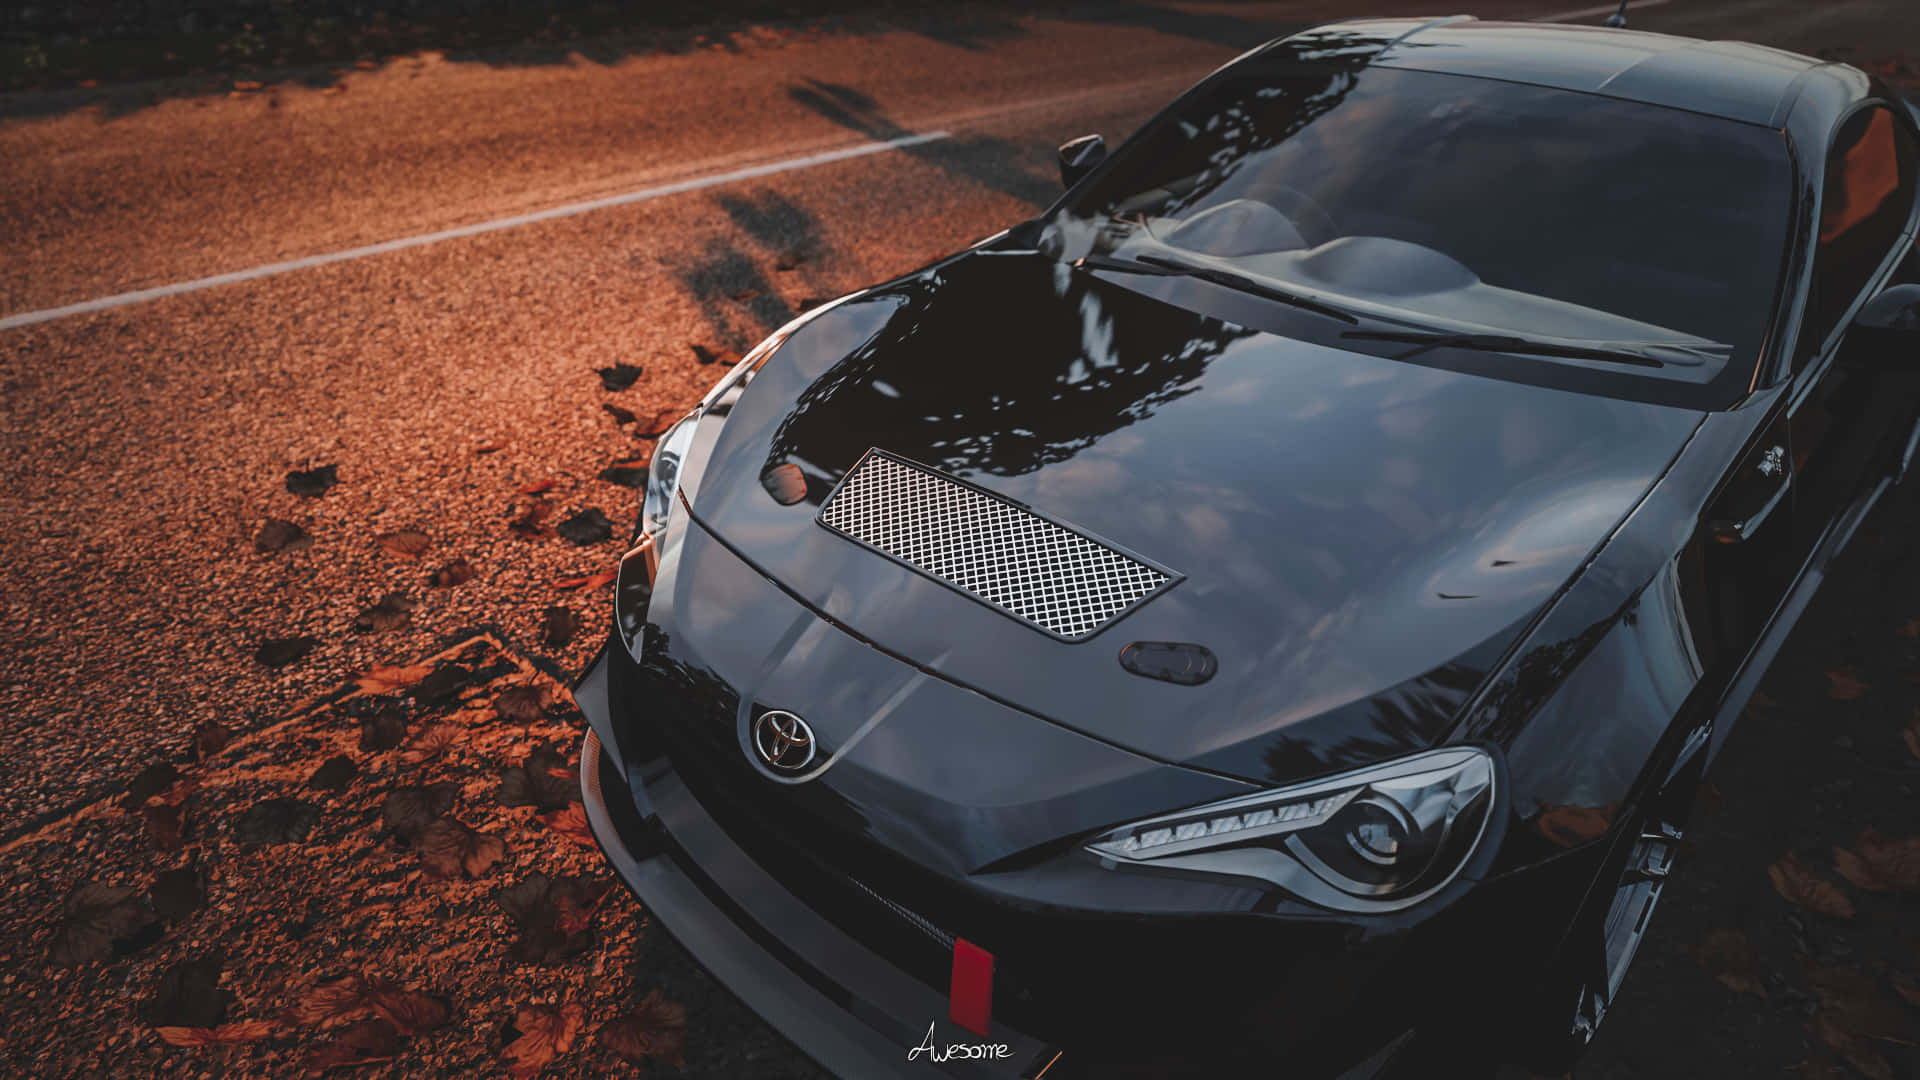 "The Toyota 86, a sleek and stylish sports car for the everyday driver." Wallpaper